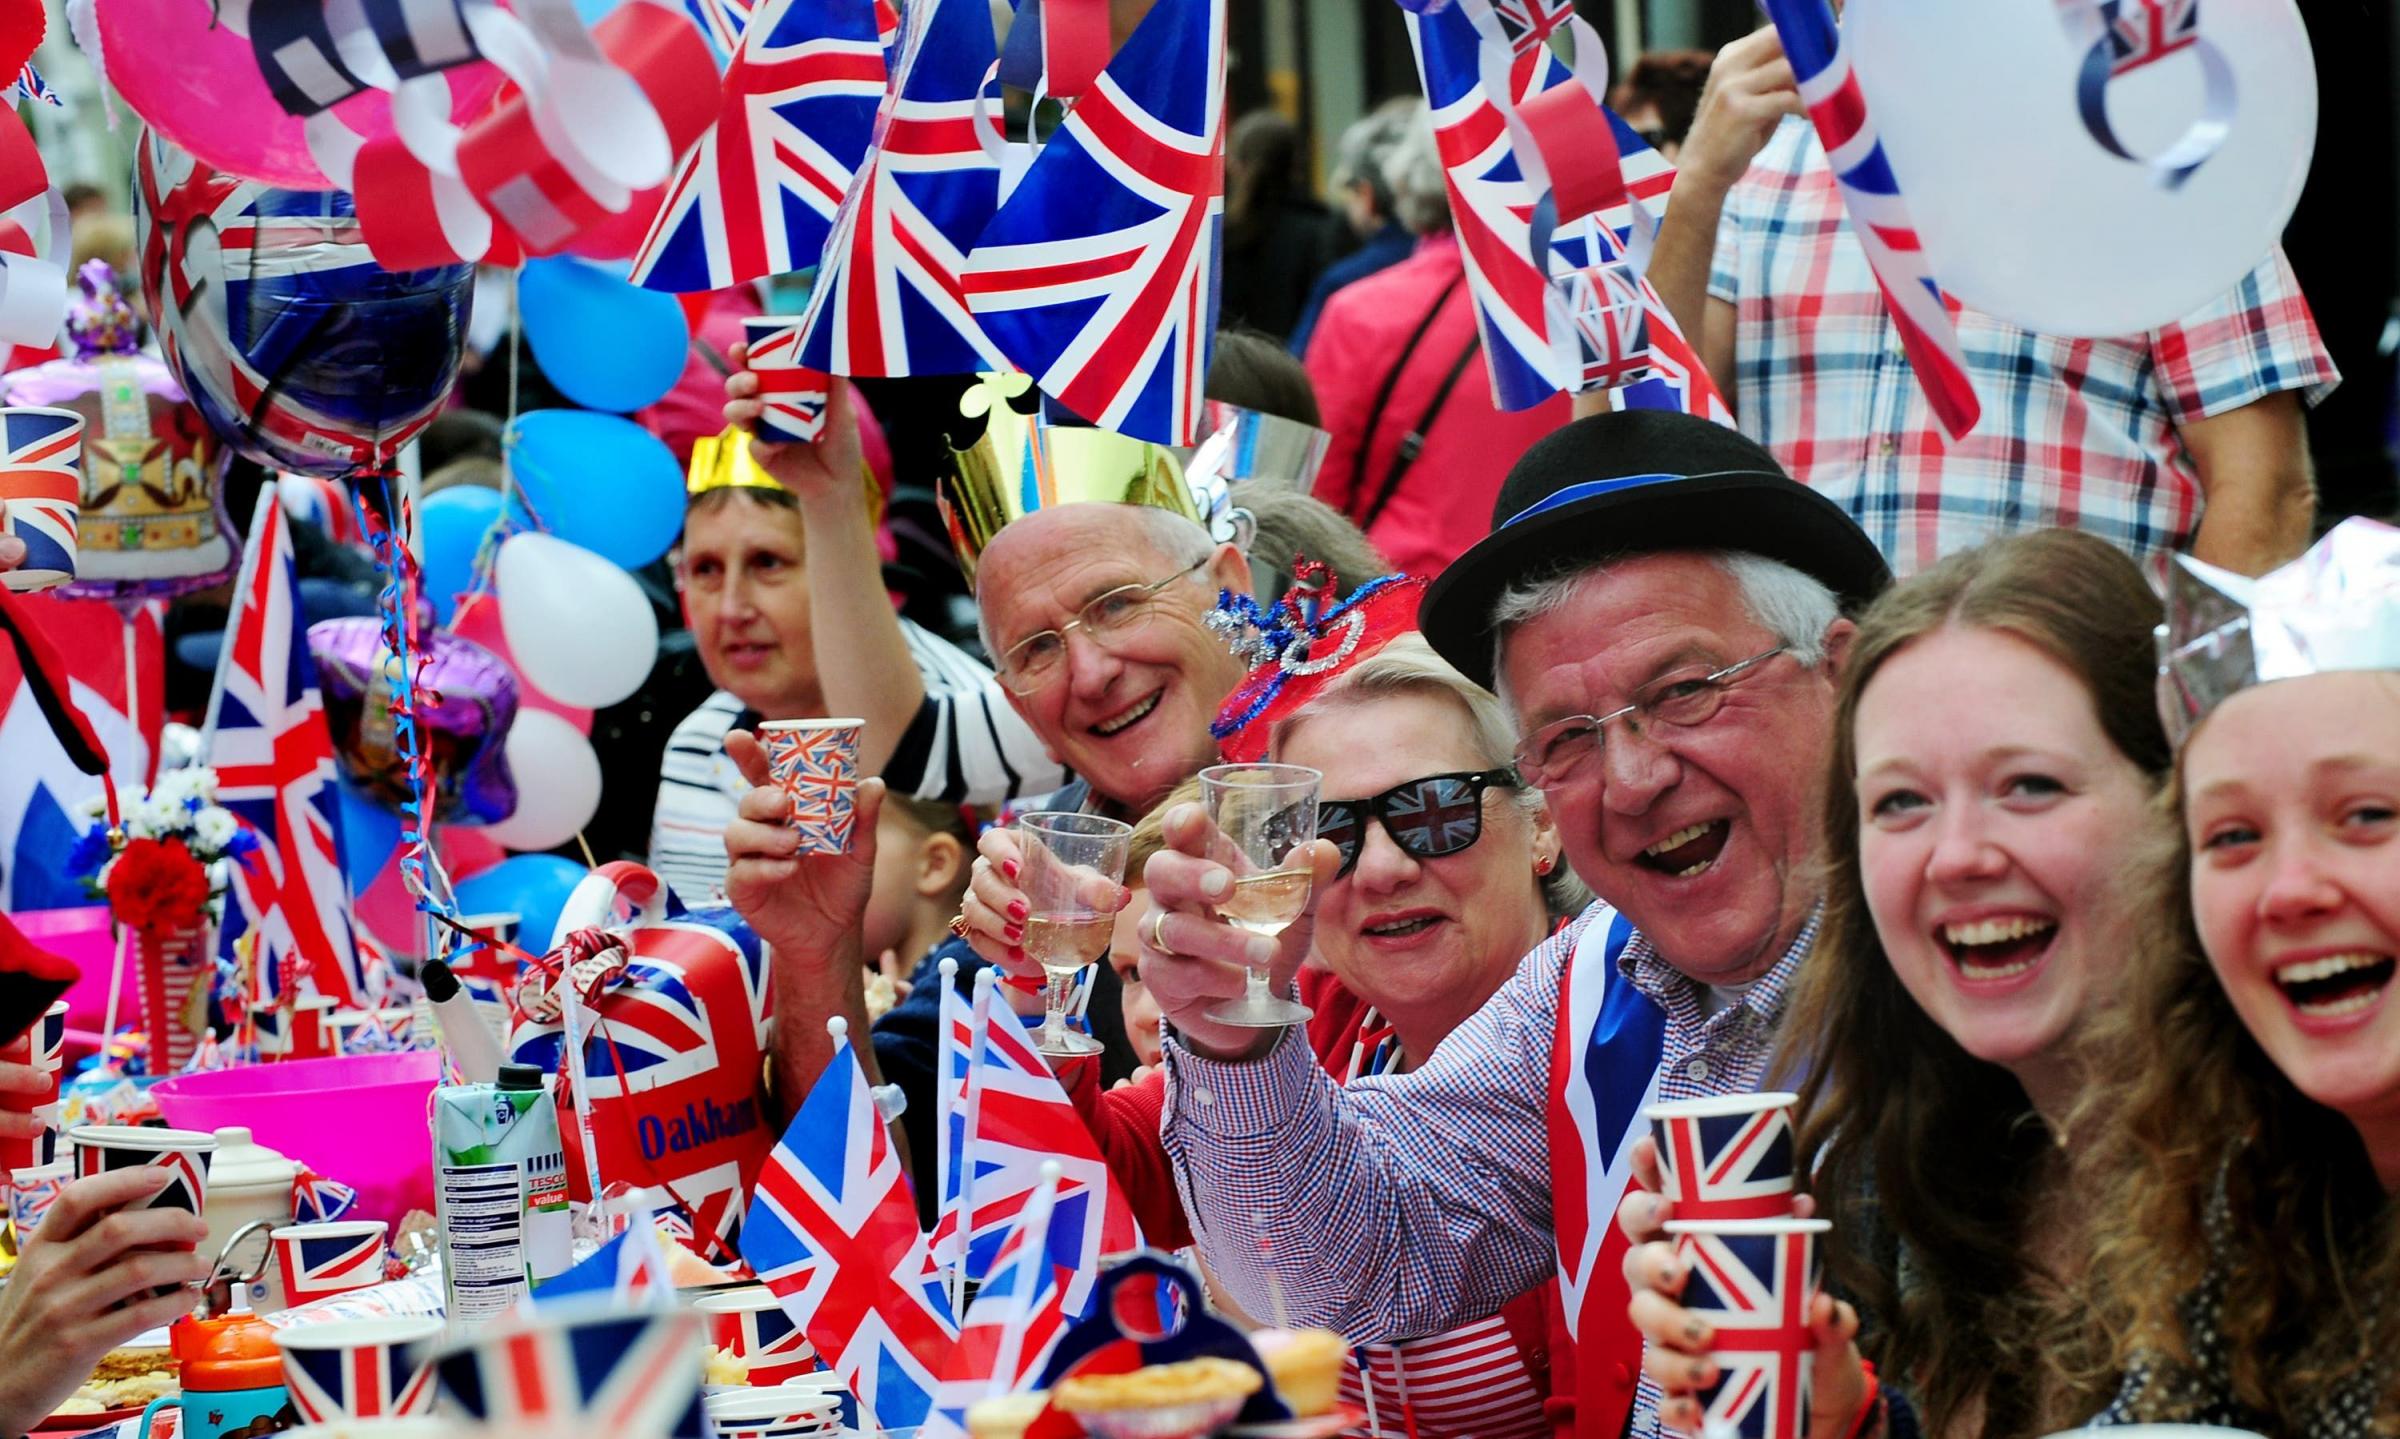 More than 85,000 people have signed up to host Big Jubilee Lunches, the official community celebration of the Queen's Platinum Jubilee Image: PA Images